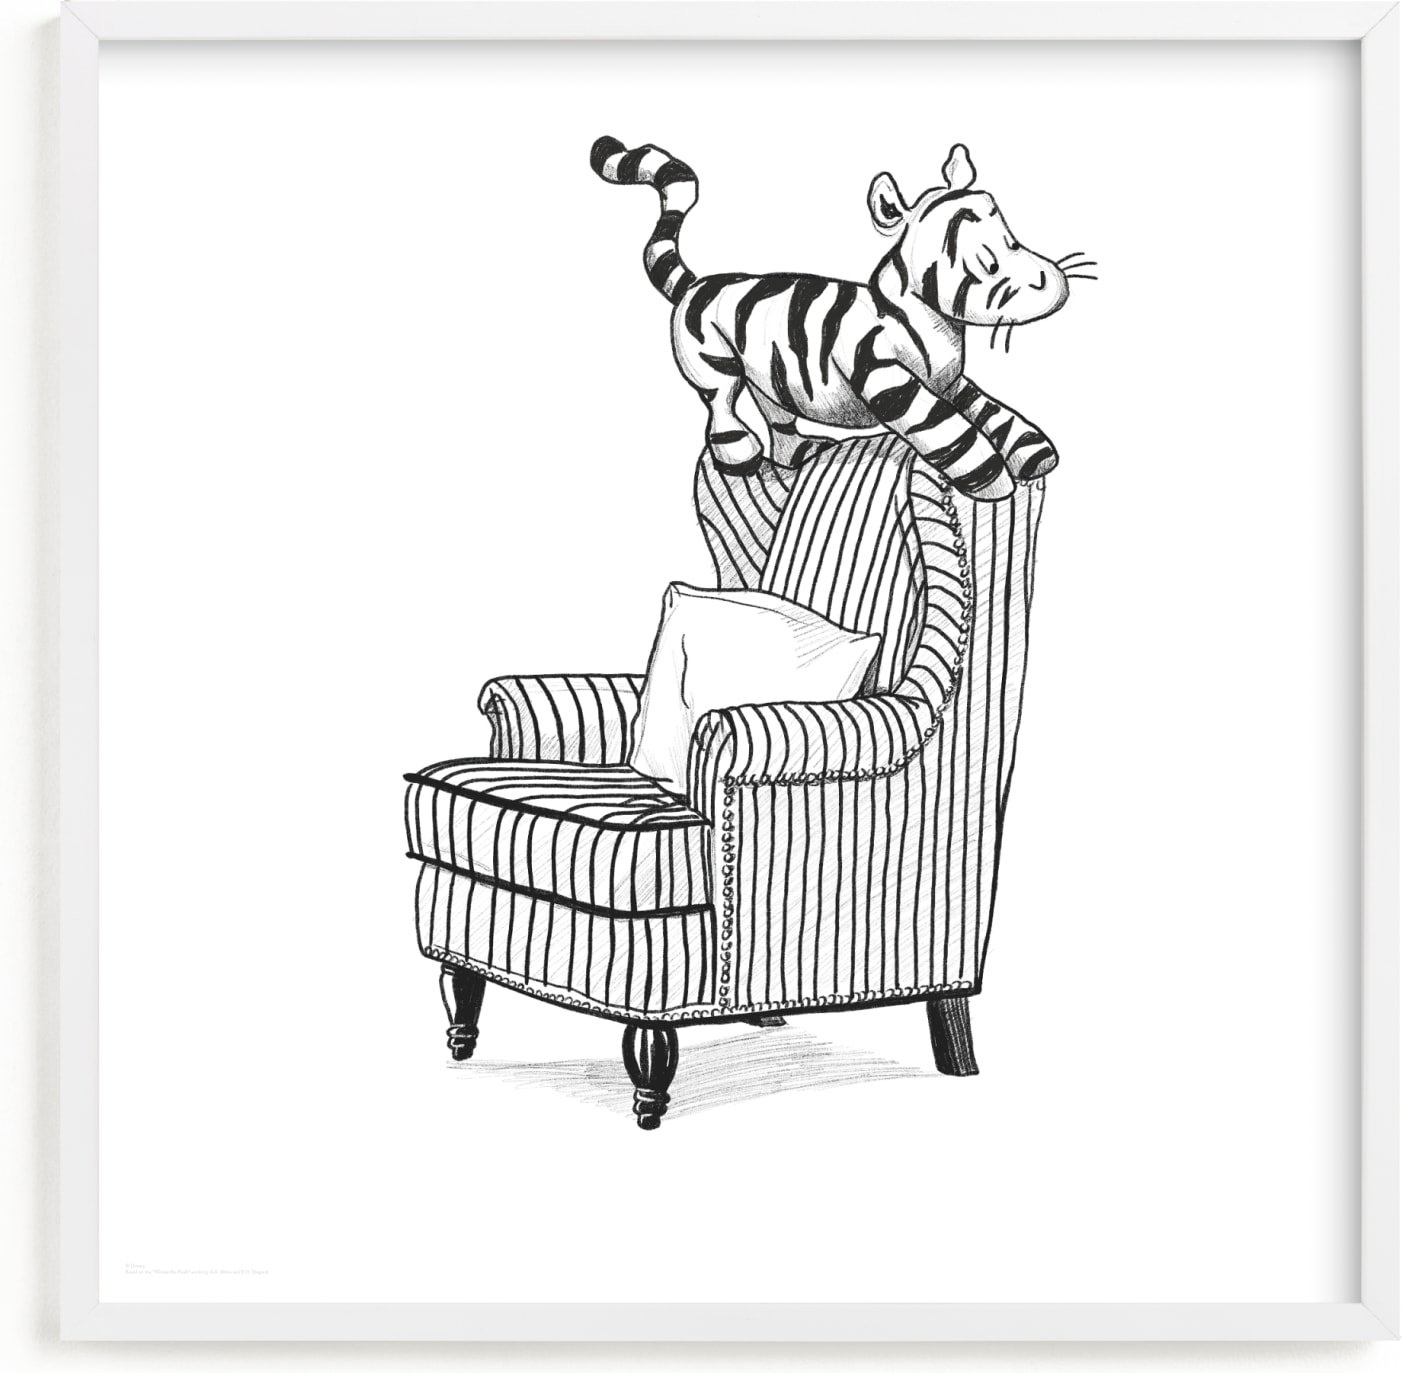 This is a black and white disney art by Stefanie Lane called Tigger Lounging.